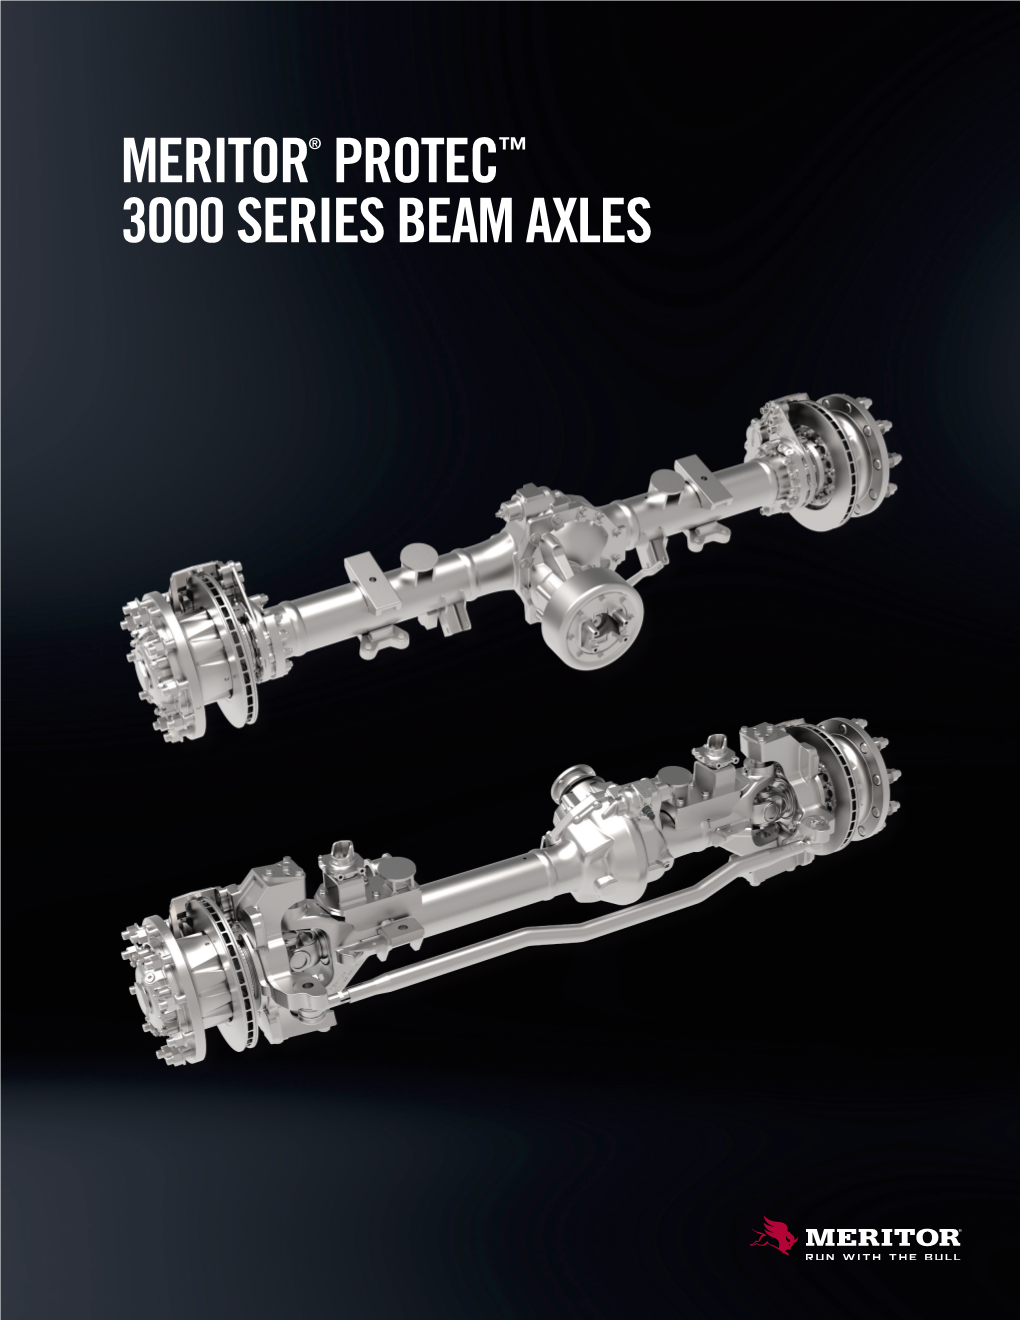 MERITOR® PROTEC™ 3000 SERIES BEAM AXLES Meritor Defense Protec Solutions Custom-Engineered and Purpose-Built for the Demands of Class 5 Applications